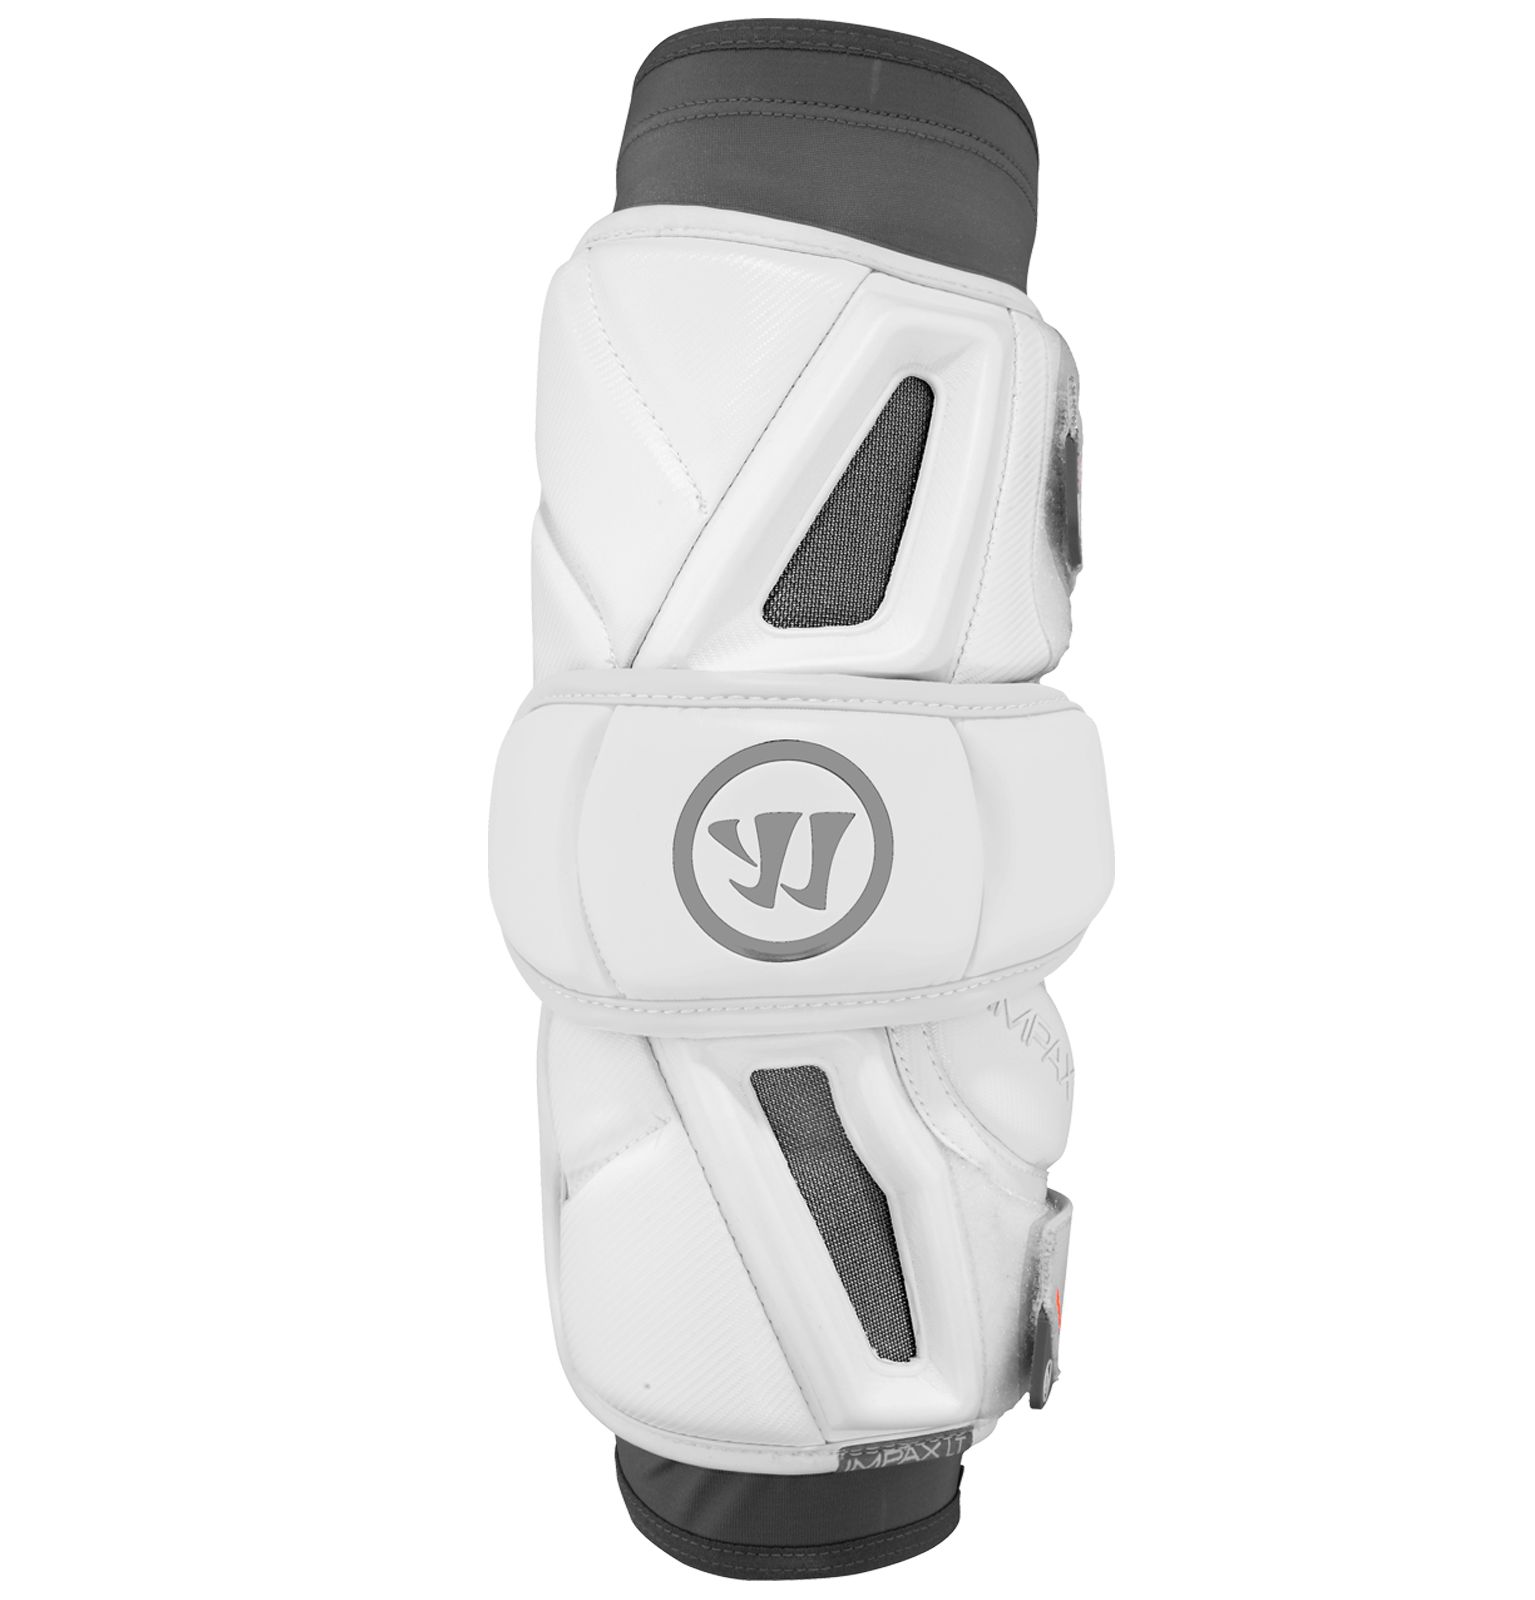 Burn Pro Arm Pad, White with Grey image number 0